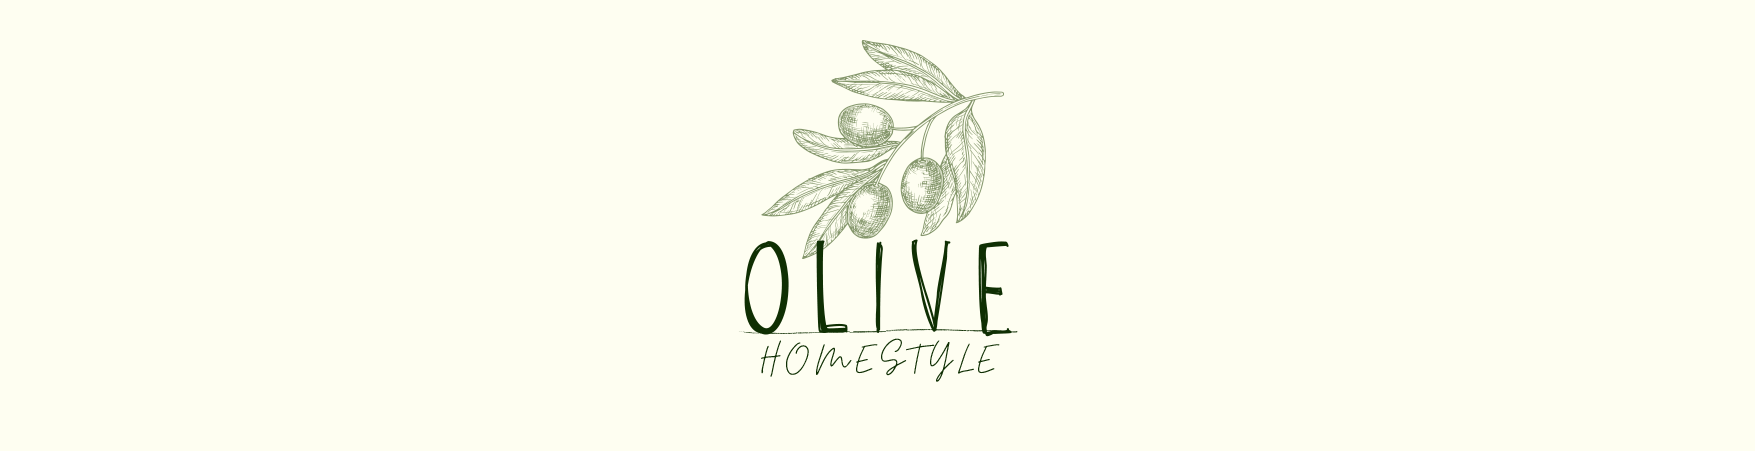 Olive Homestyle